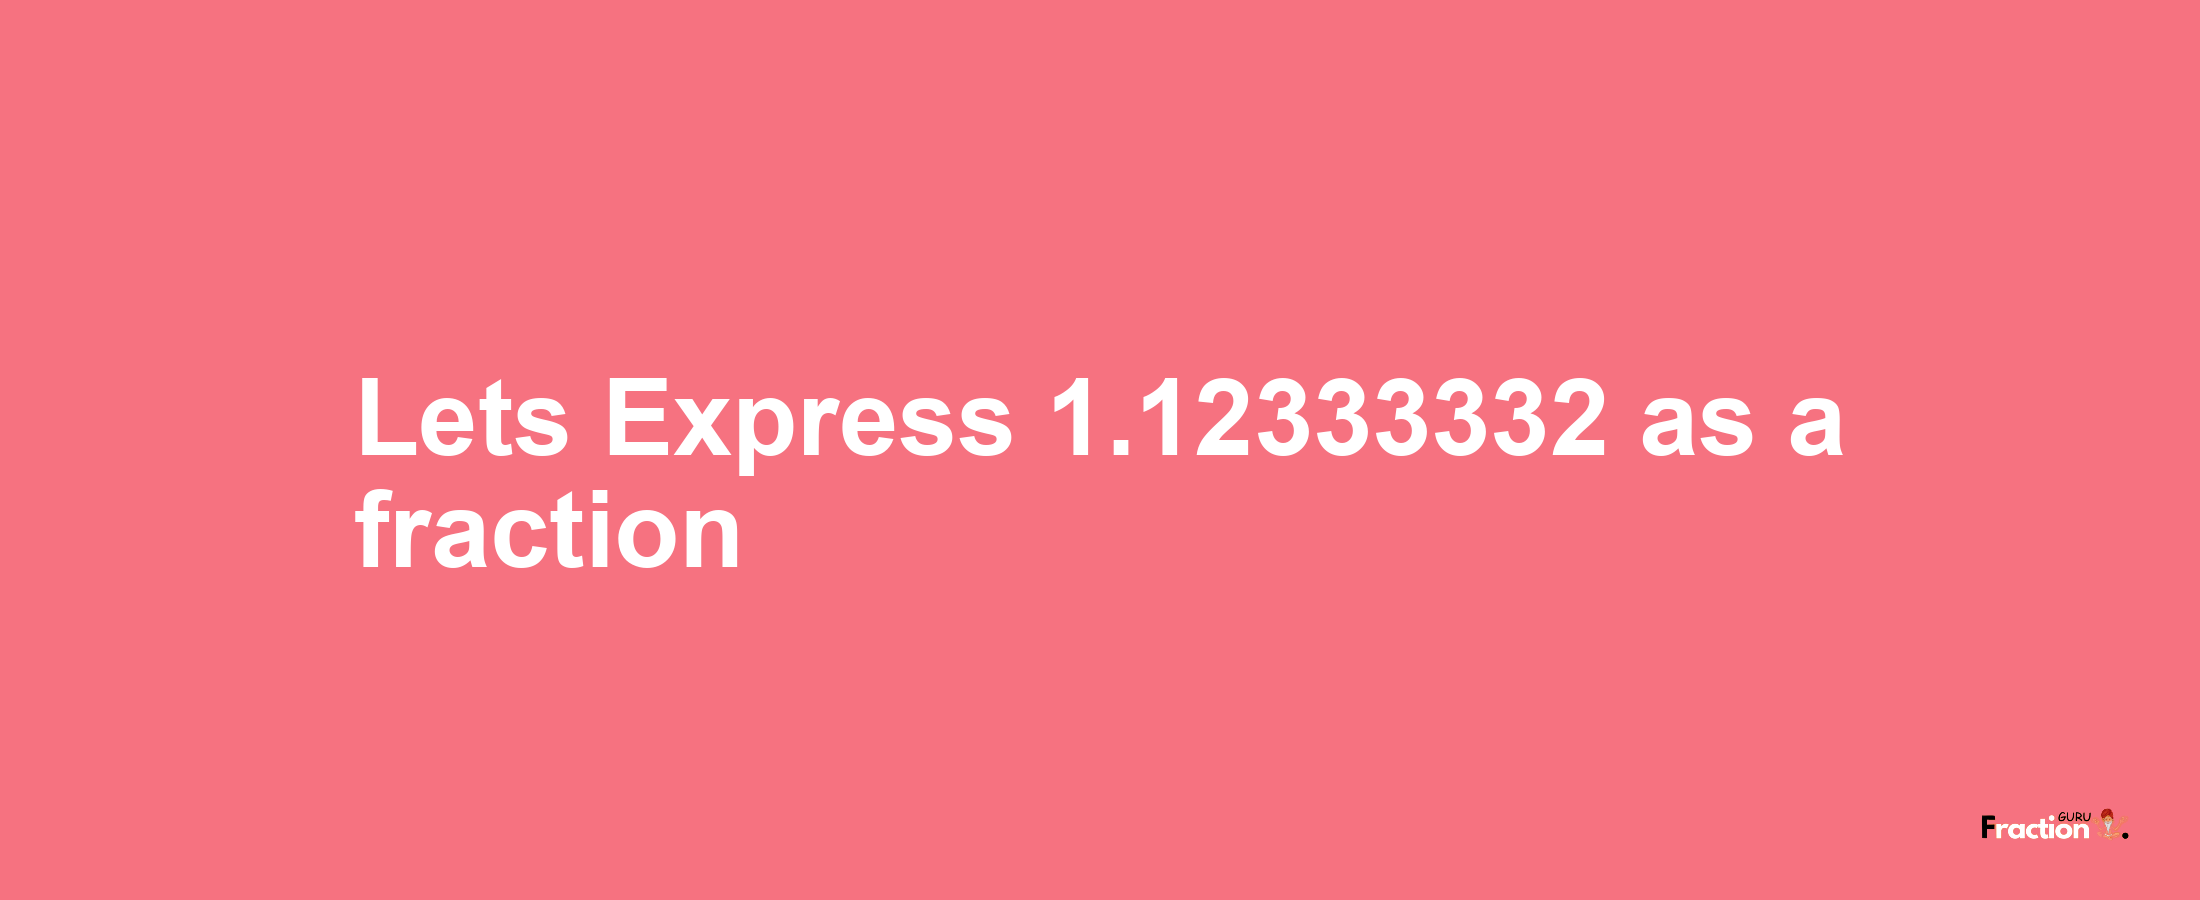 Lets Express 1.12333332 as afraction